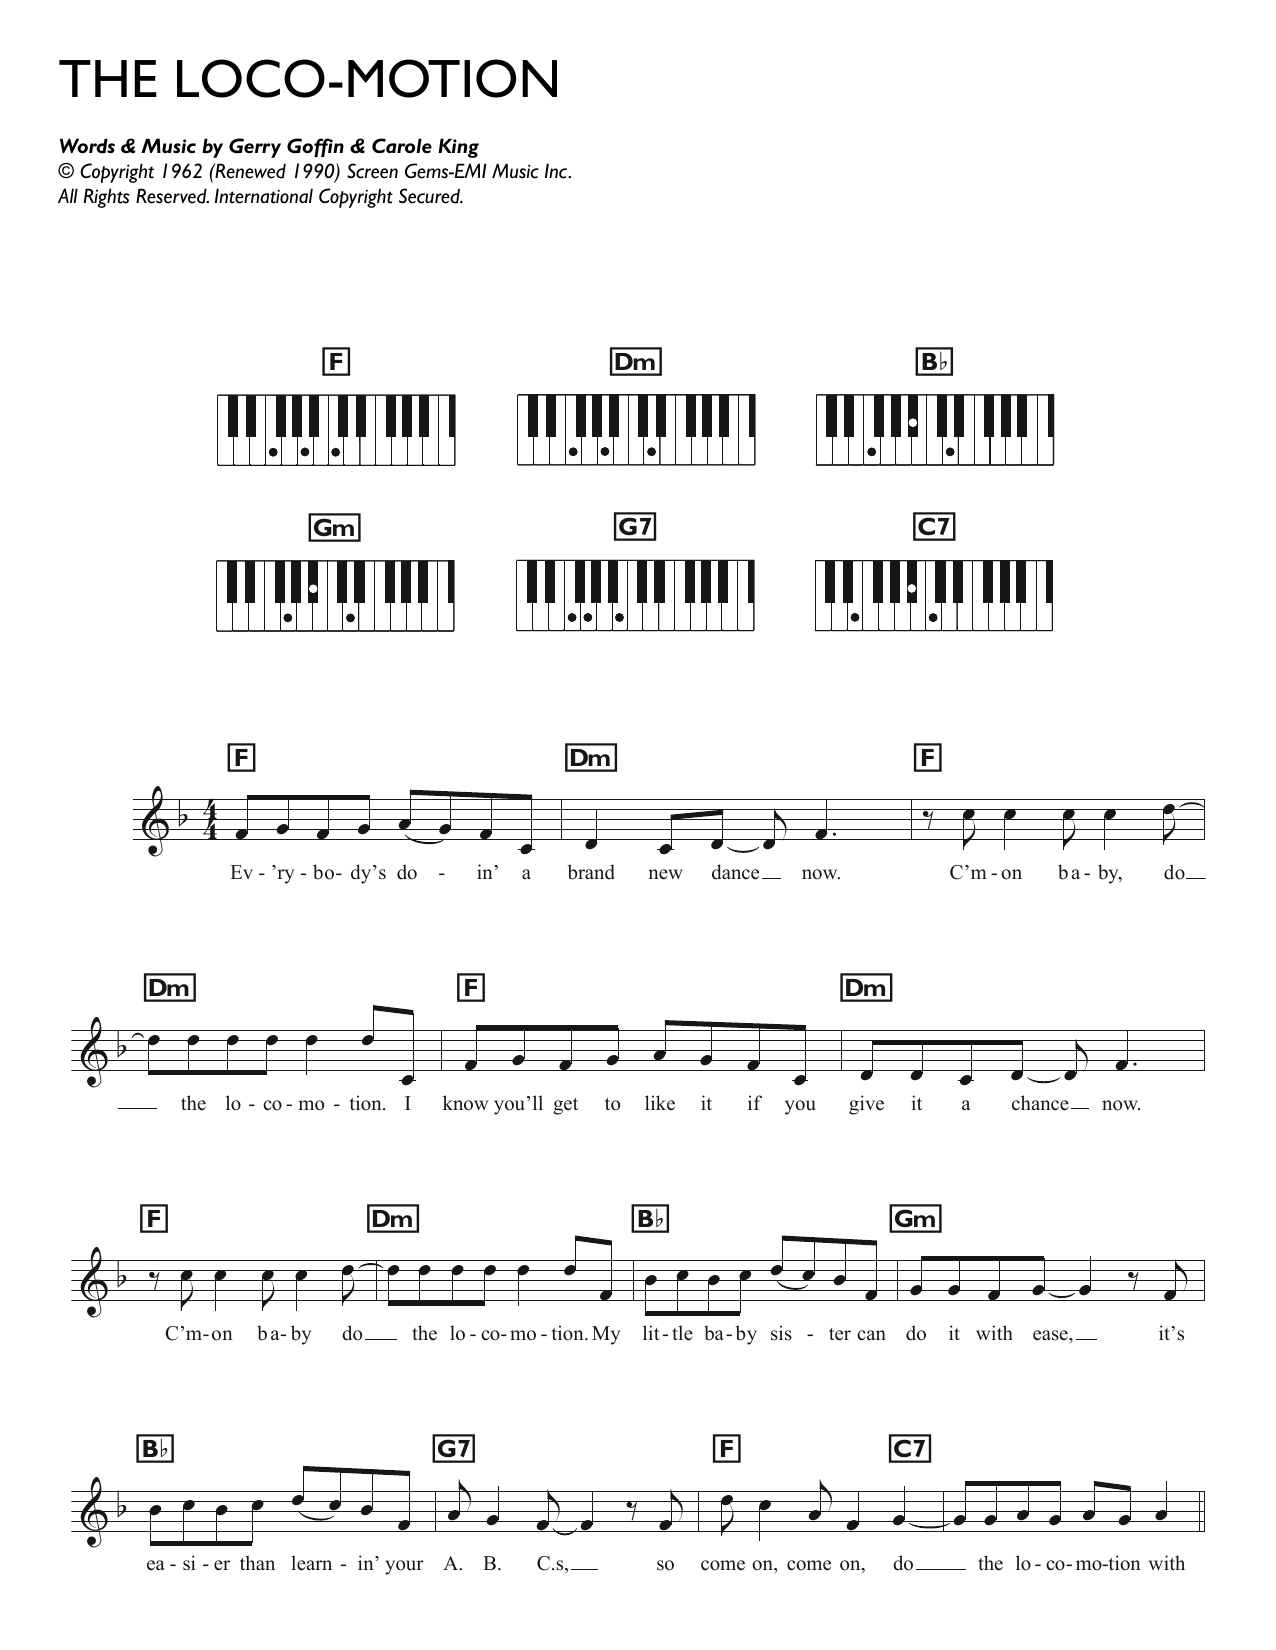 Download Kylie Minogue The Loco-Motion Sheet Music